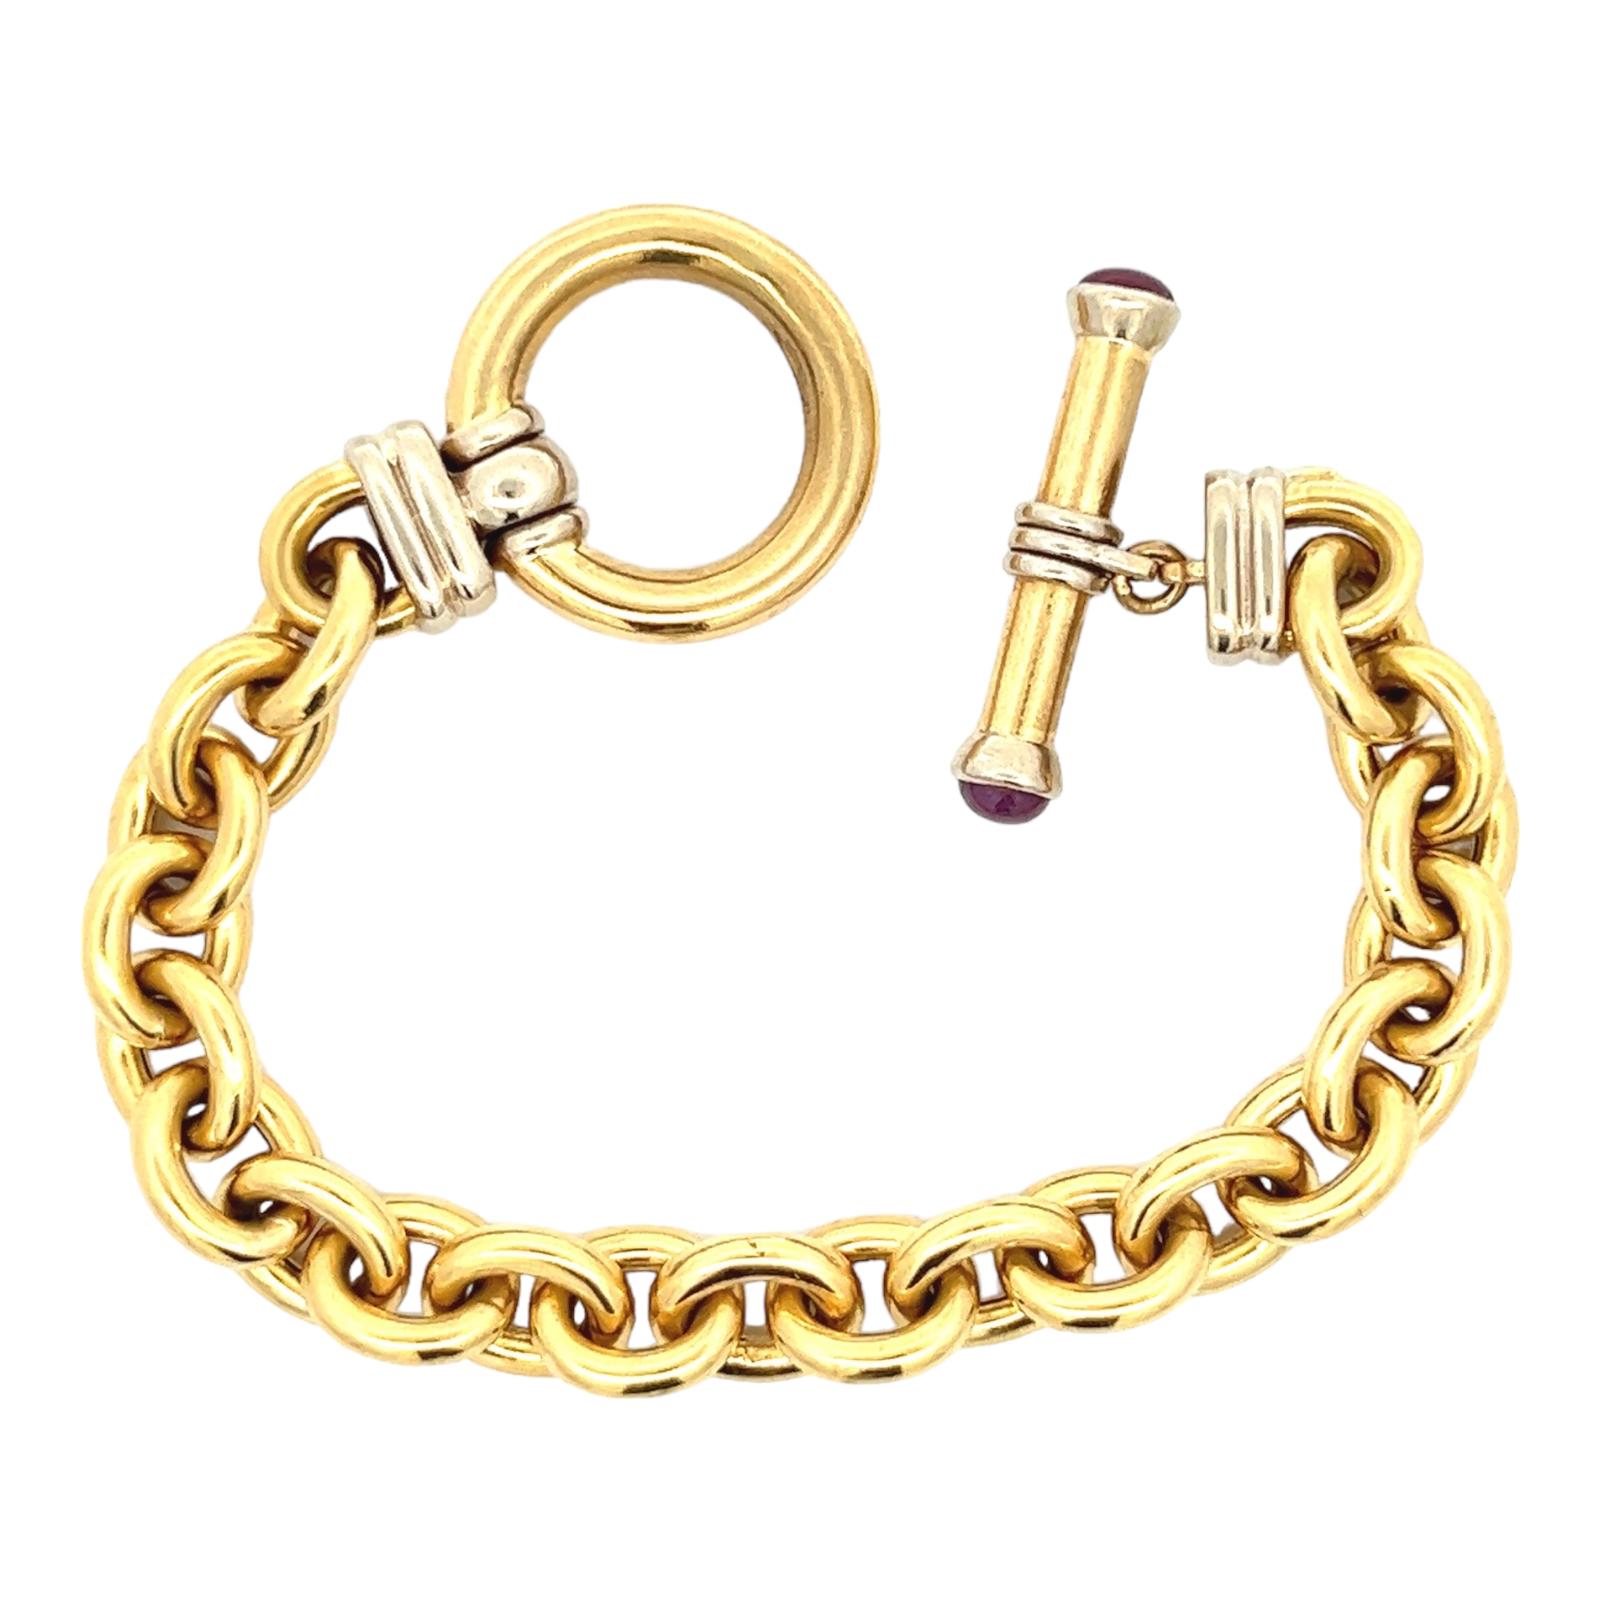 Italian modern oval link bracelet crafted in 18 karat white and yellow gold. The bracelet features a toggle clasp with cabochon ruby endpoints. The bracelet measures 7.5 inches in length and is signed Elledue Italy. 